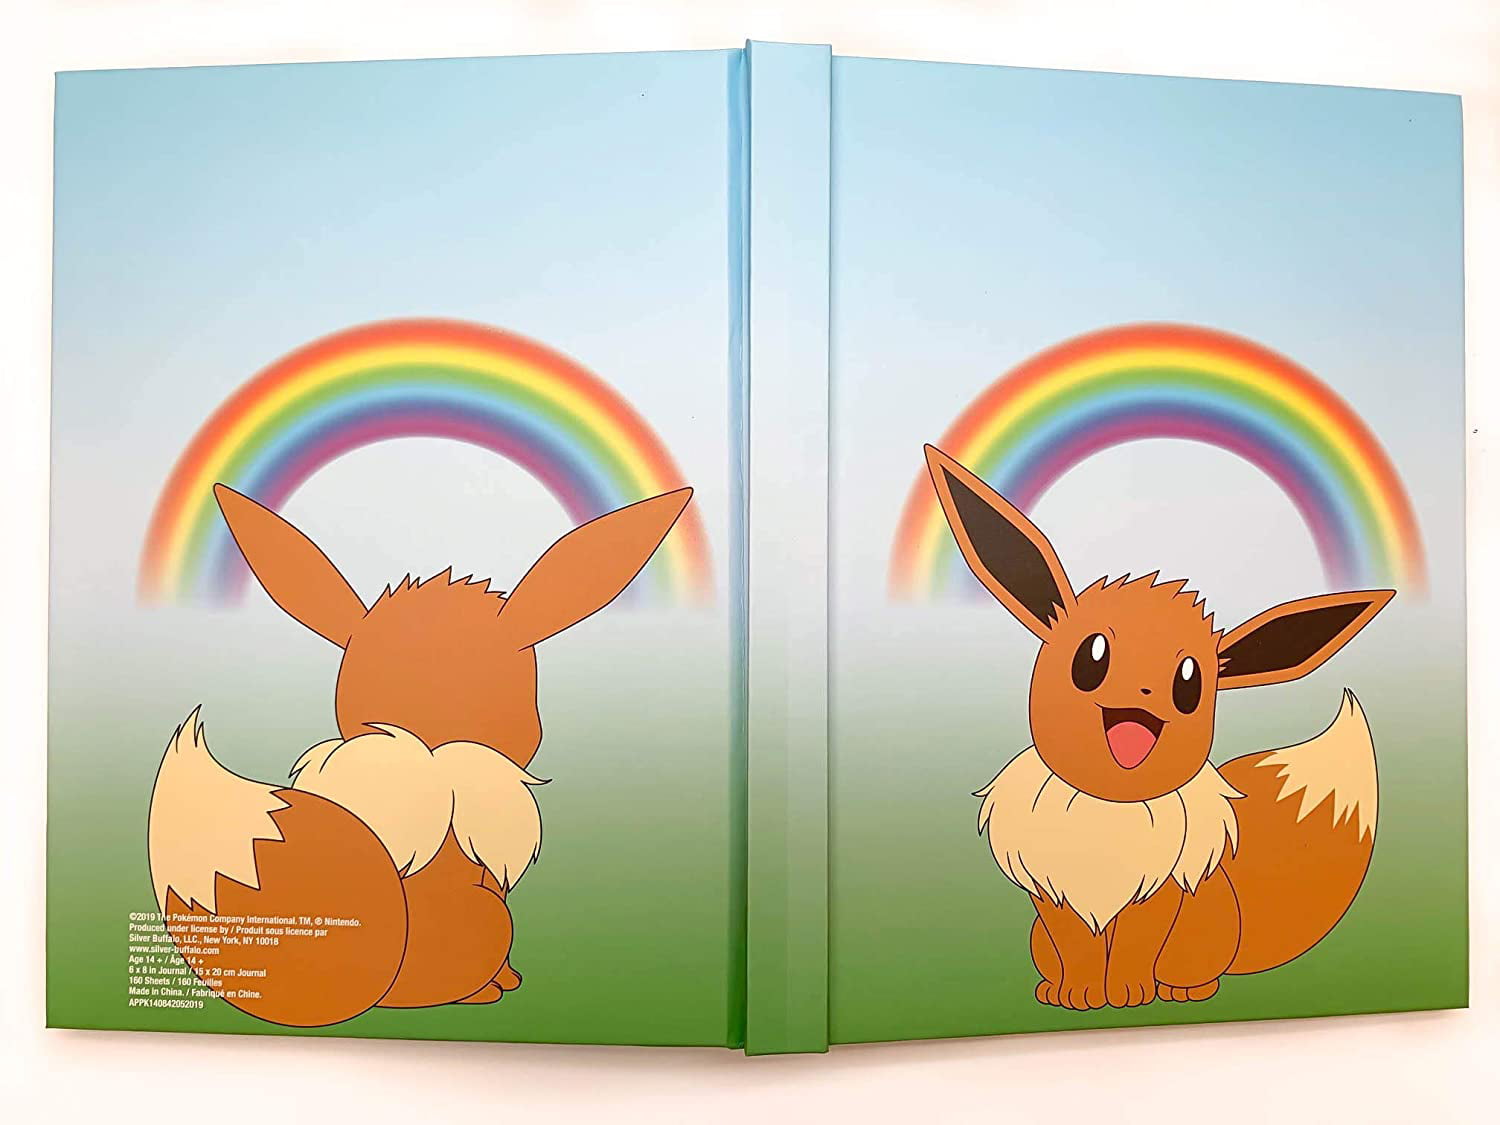 Pokemon Eevee Eeveething Will Be Great Hard Cover Journal 6 x 8 inches